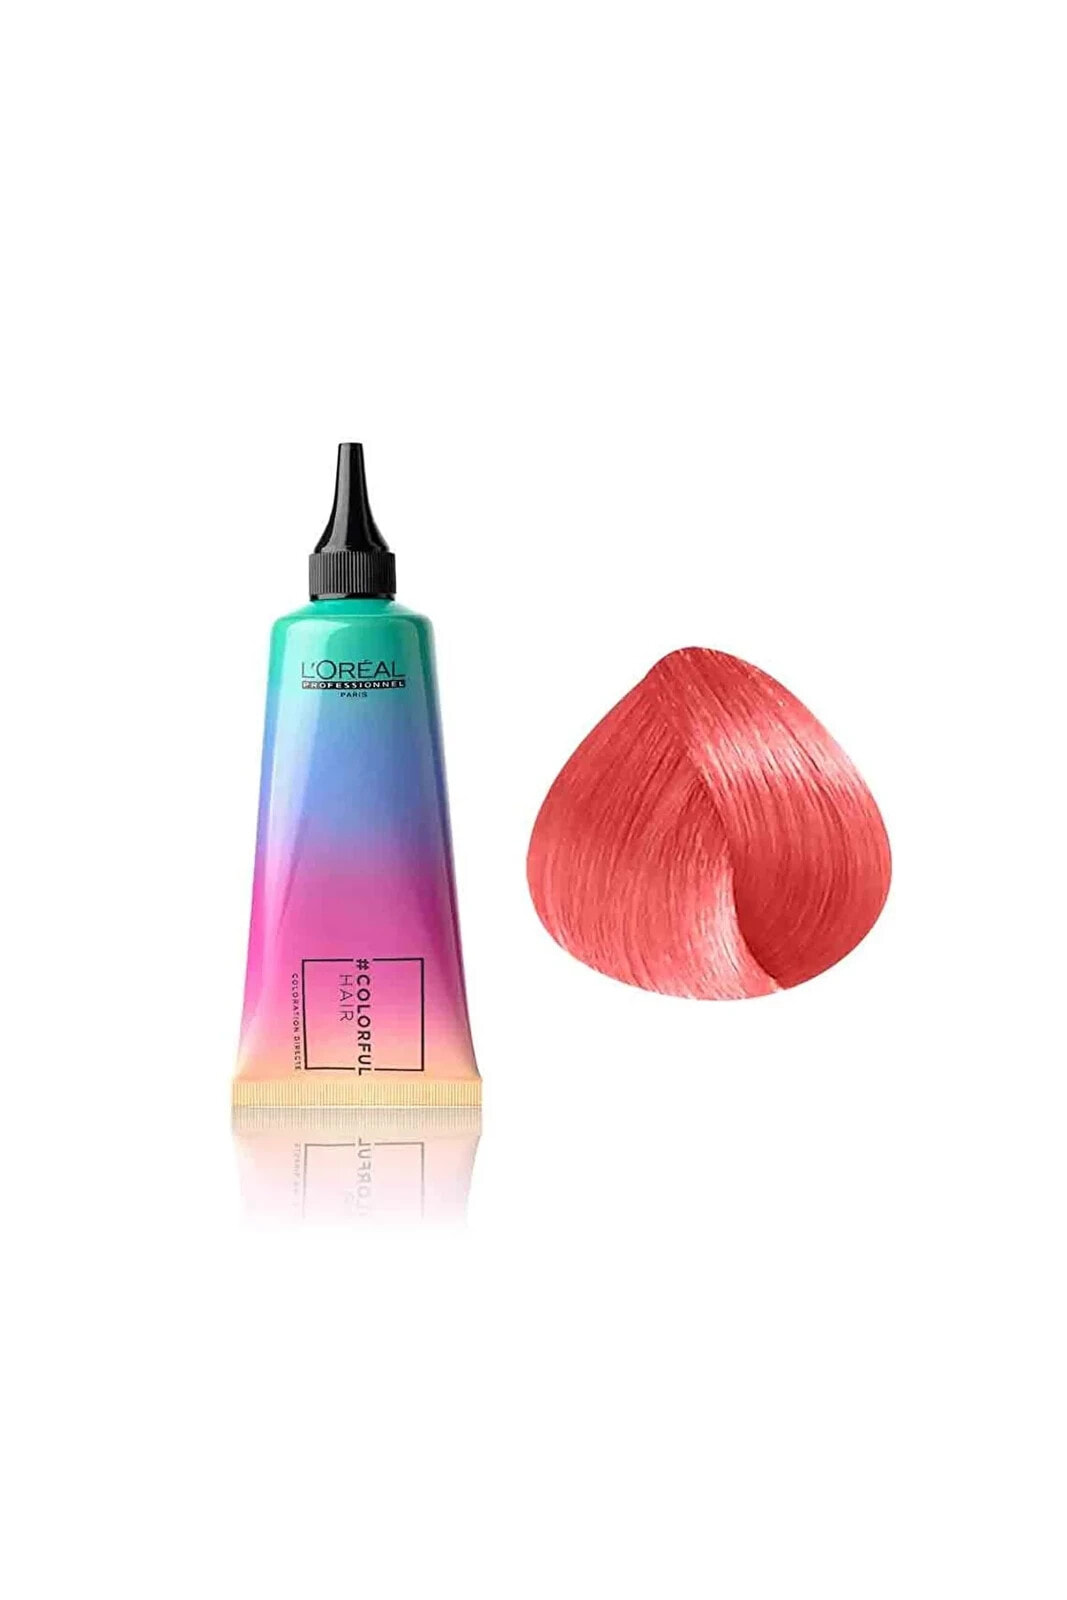 Colorful Hair Sunset Coral Natural Orange Hair Color Cream 90ml